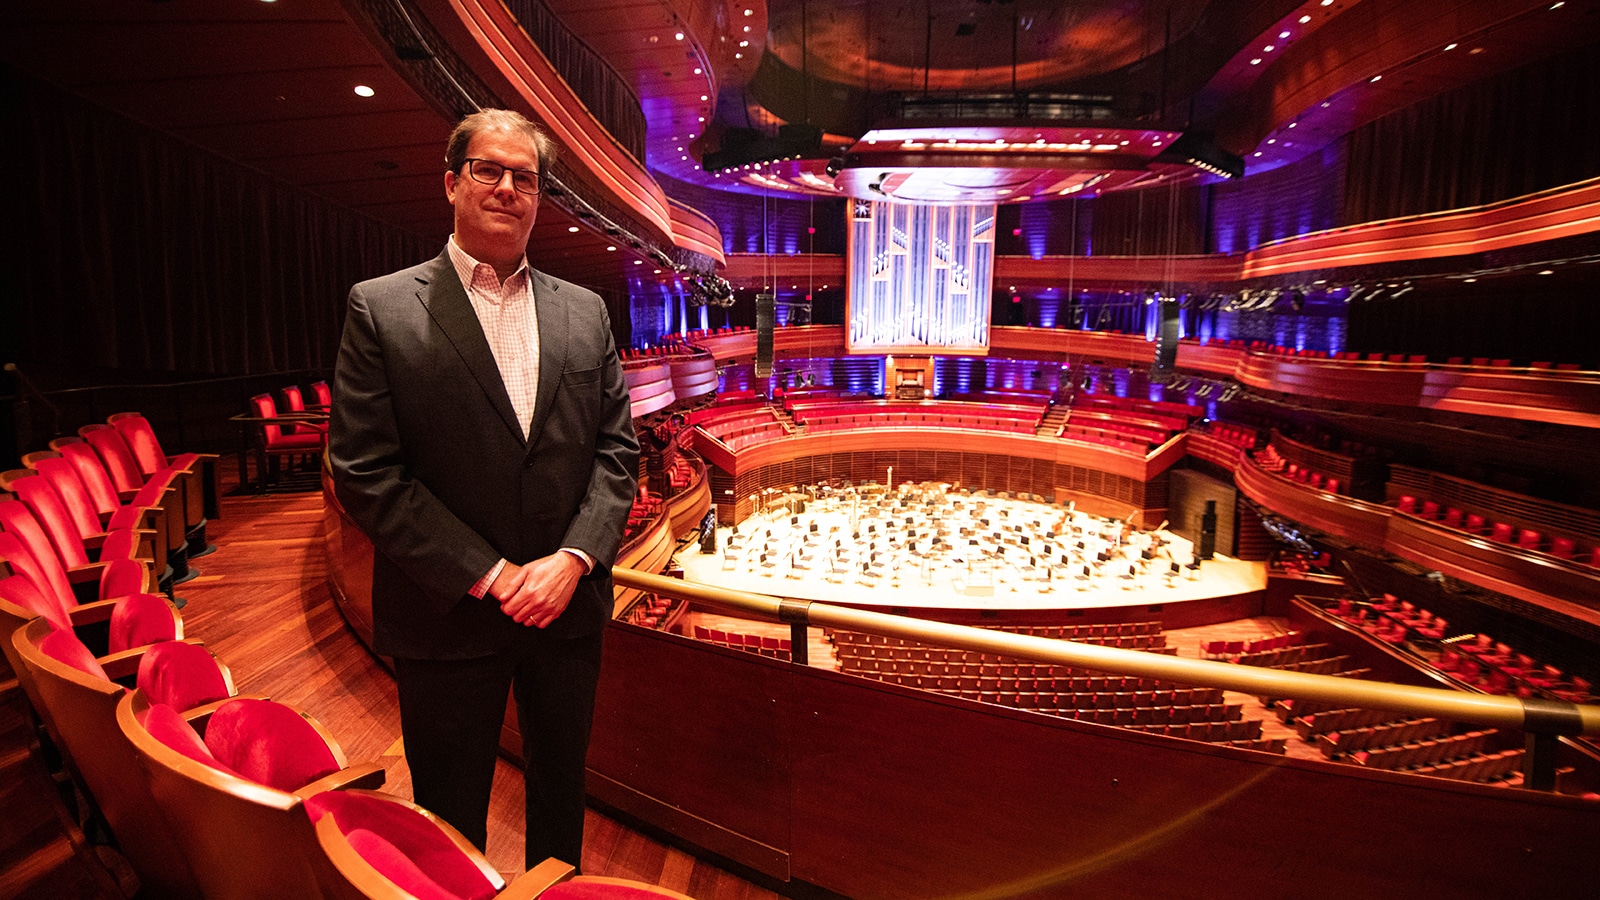 Matías Tarnopolsky, President and CEO of The Philadelphia Orchestra and Kimmel Center, Inc.